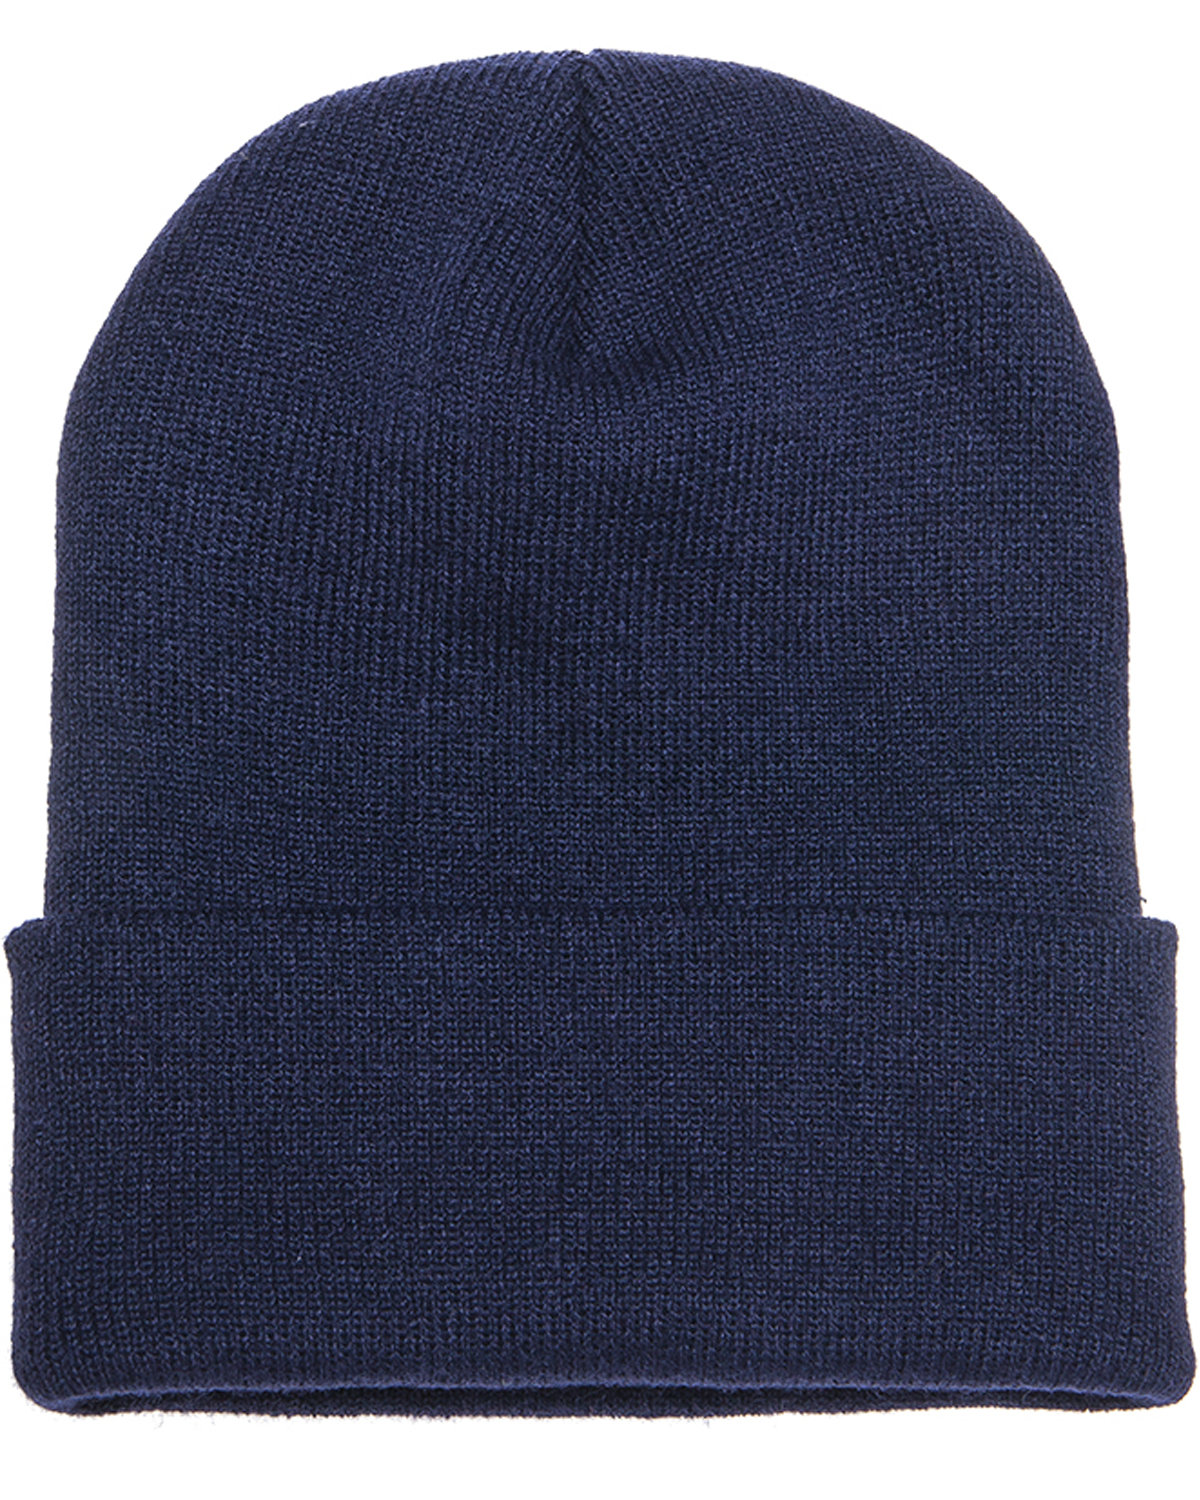 Yupoong Adult Cuffed Knit Beanie alphabroder 